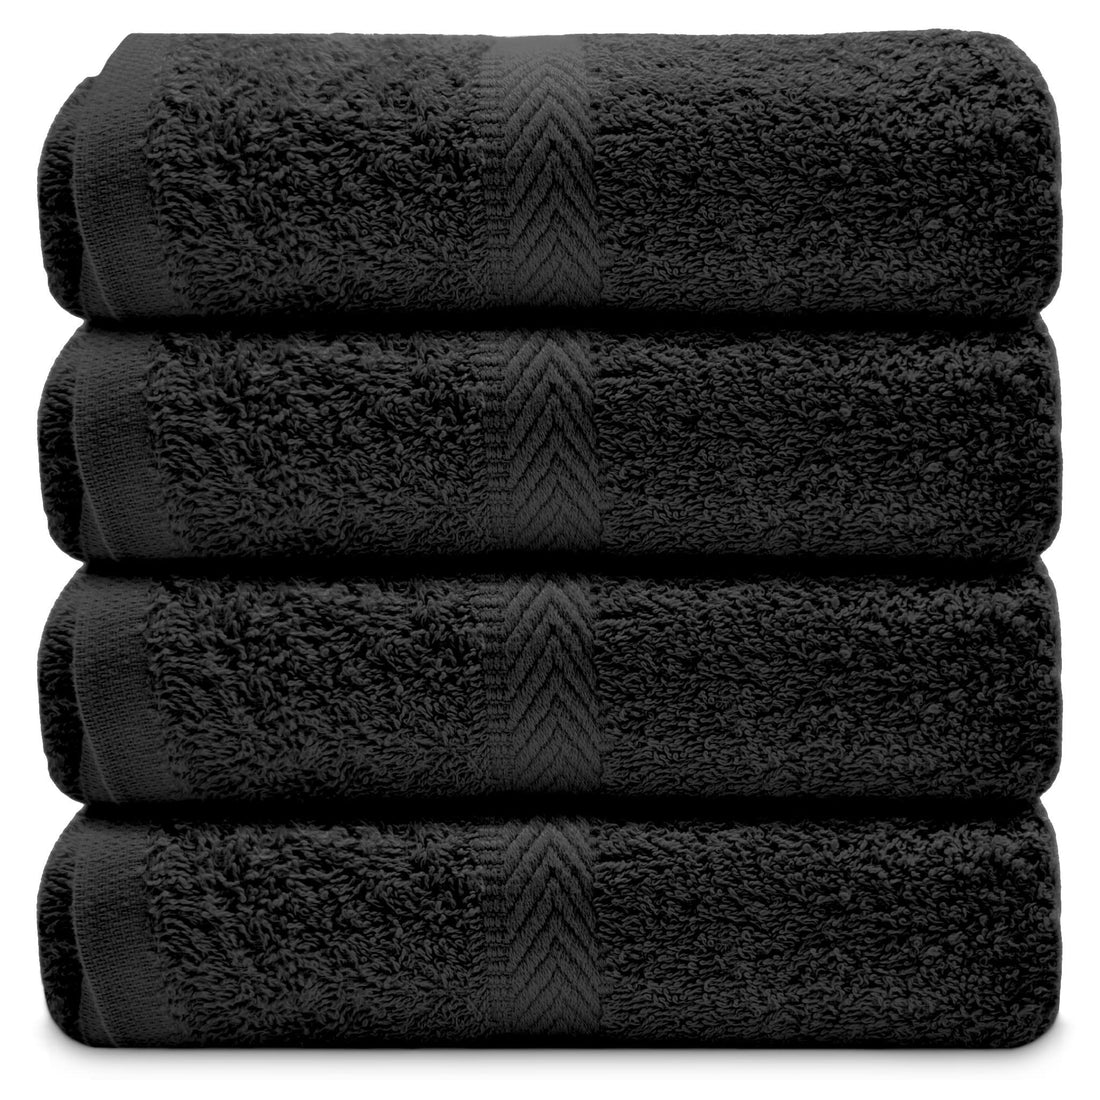 Jasmine Waldorf Bath Sheet Extra Long Staple 100% Cotton Set of 4 Pack Extra 400 GSM Absorbent Ideal for Guest Slim Quick Dry Large 90 x 140 cm